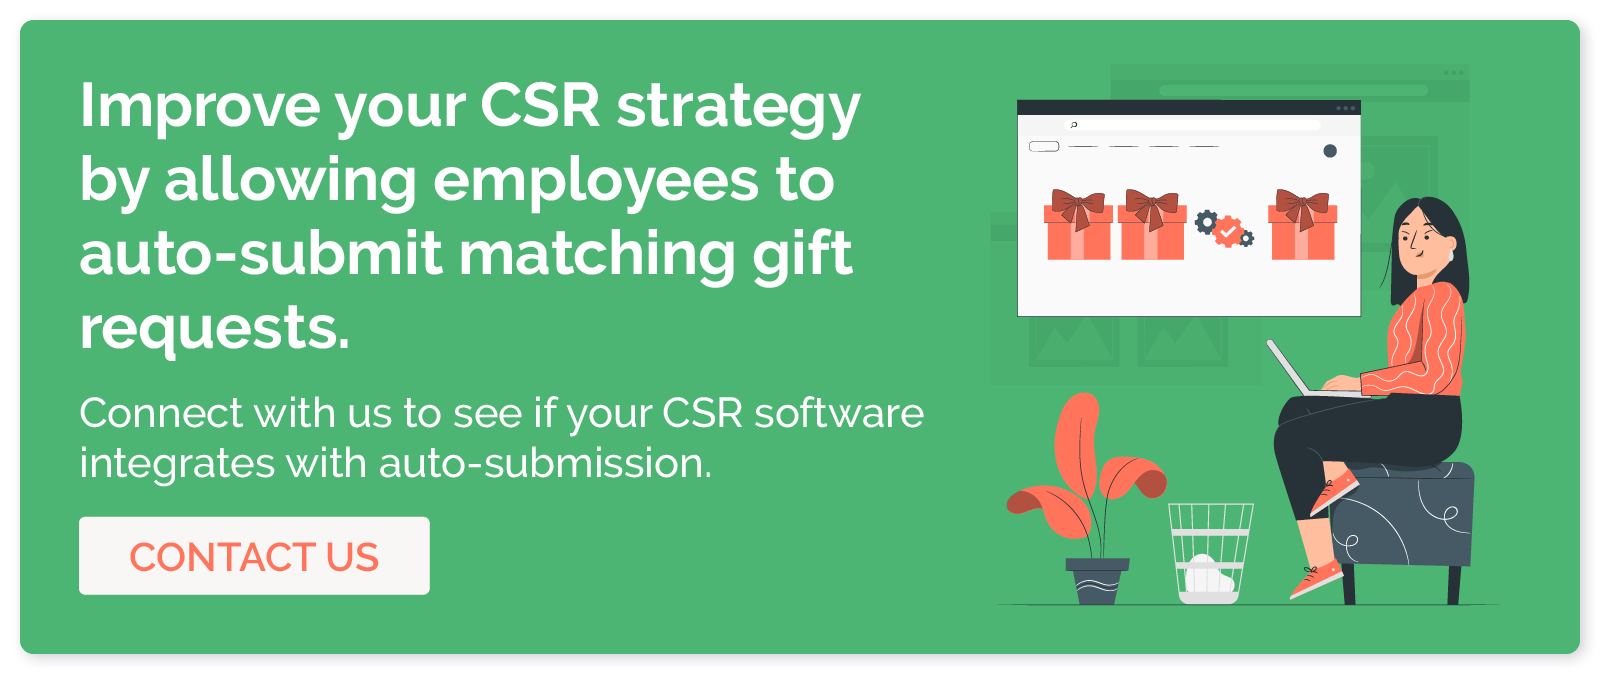 Check if your CSR reporting software integrates with 360MatchPro to maximize the ease and effectiveness of your program via auto-submission.